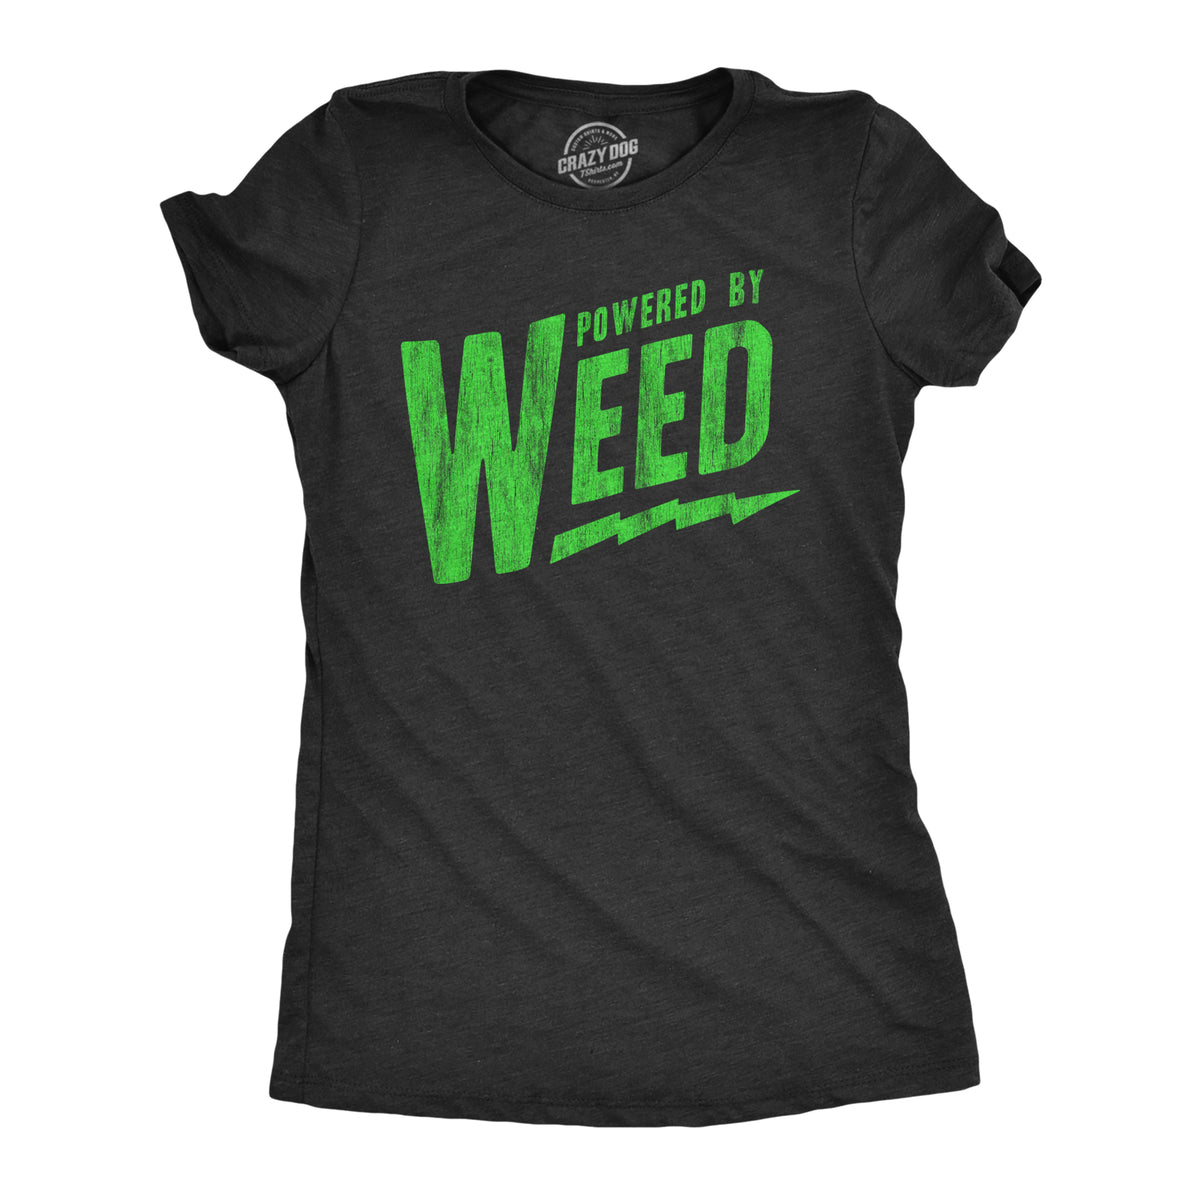 Funny Heather Black - WEED Powered By Weed Womens T Shirt Nerdy 420 sarcastic Tee